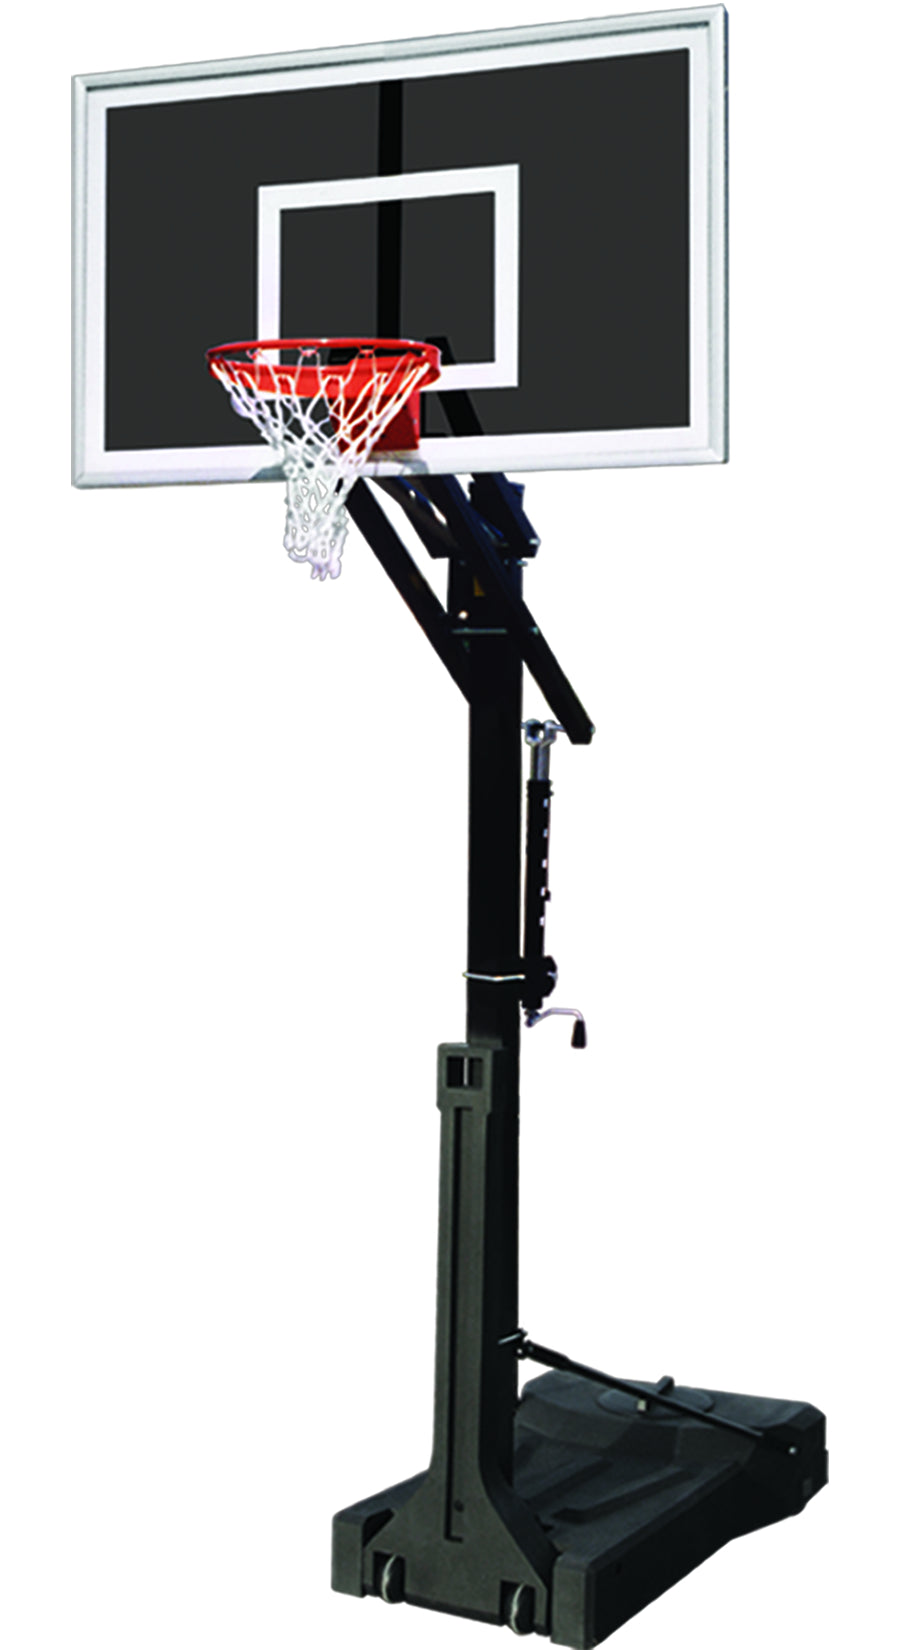 First Team OmniJam Eclipse Portable Basketball Goal - 36"x60" Smoked Tempered Glass